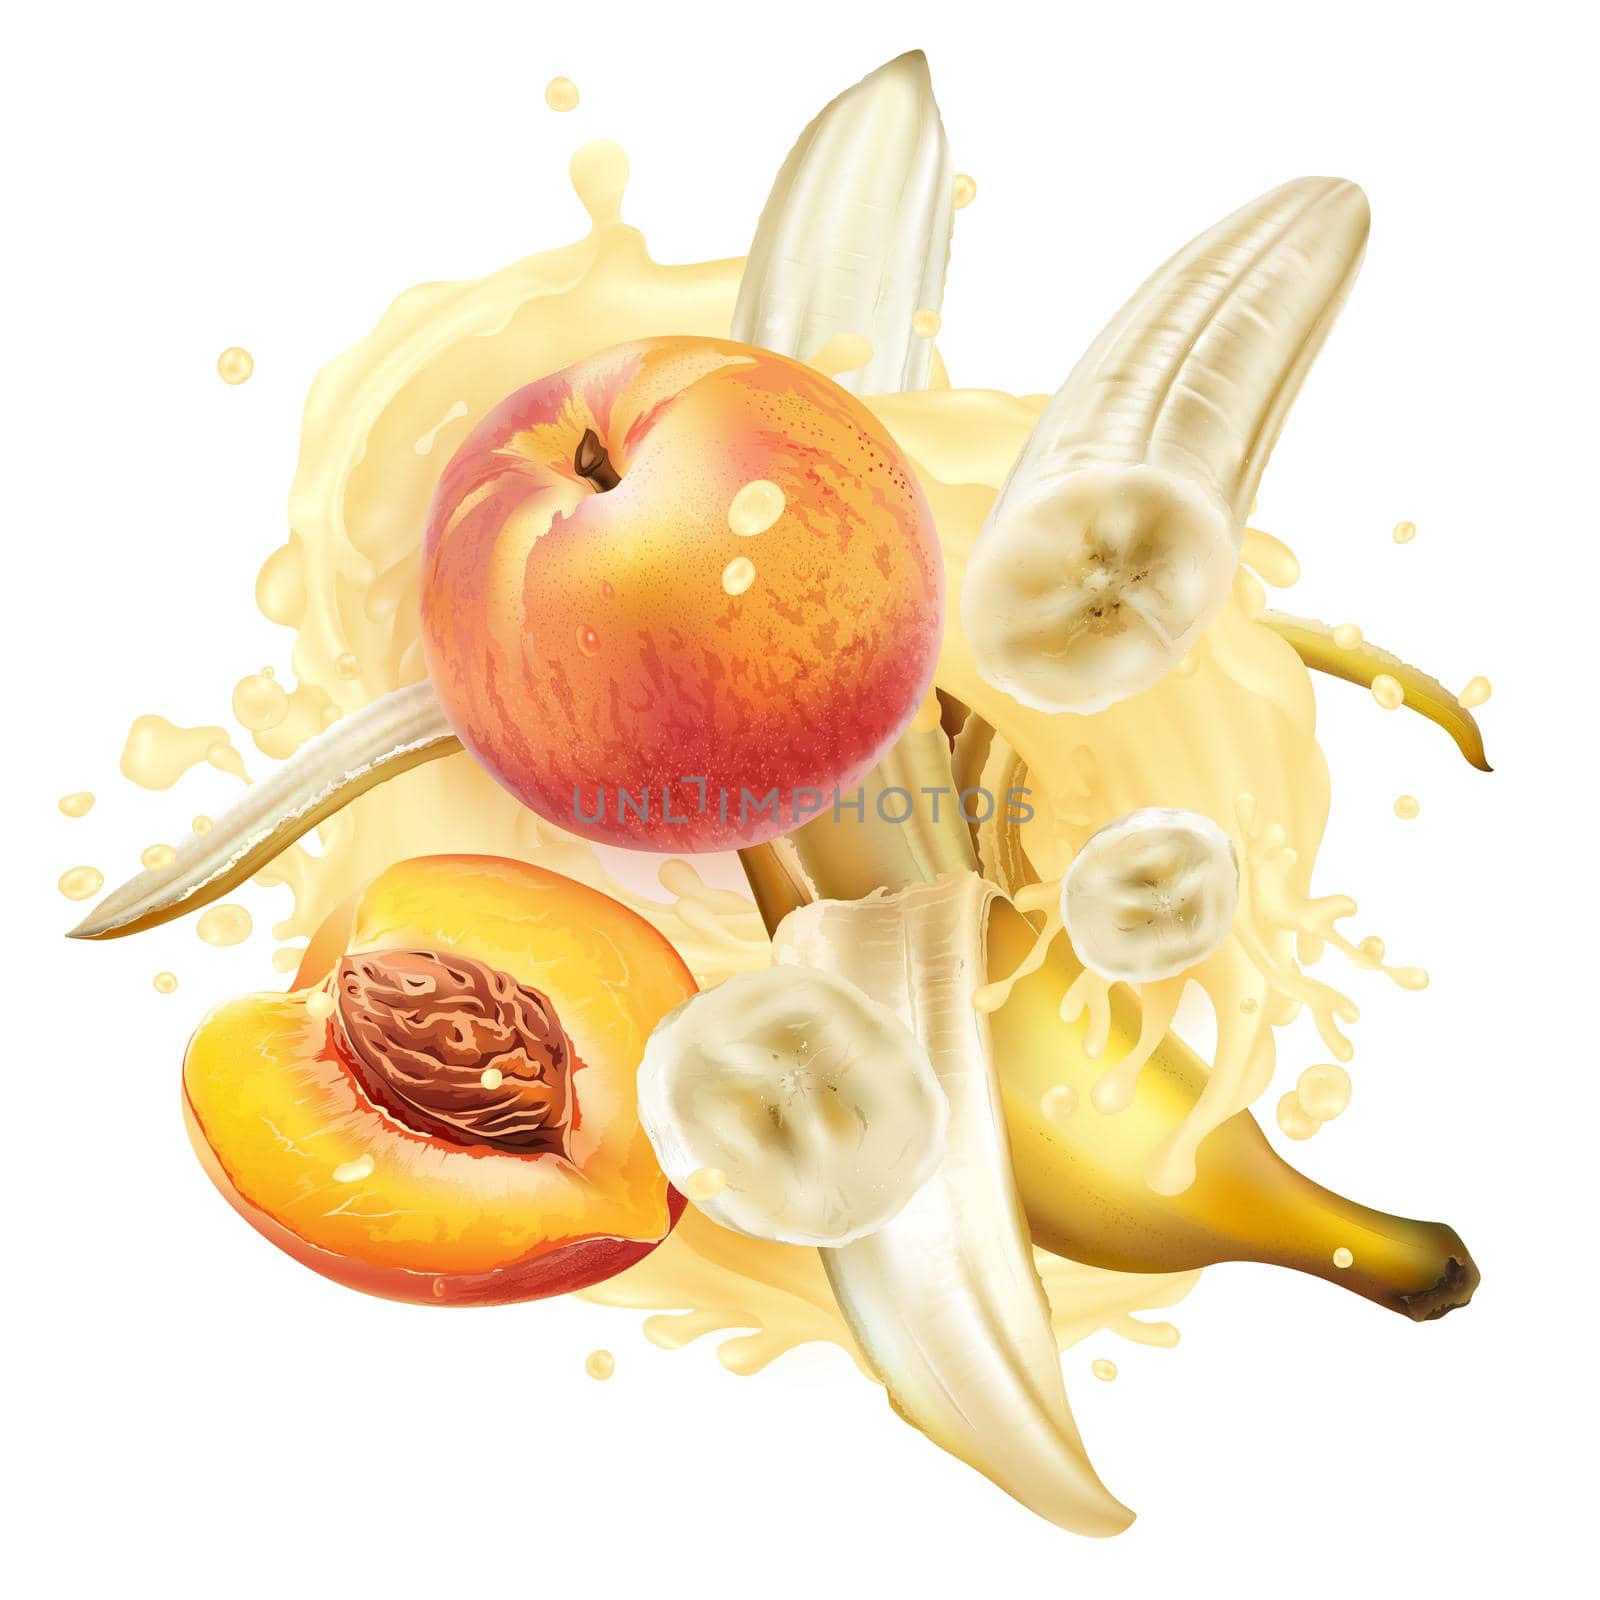 Bananas and peaches in a milkshake splash. by ConceptCafe